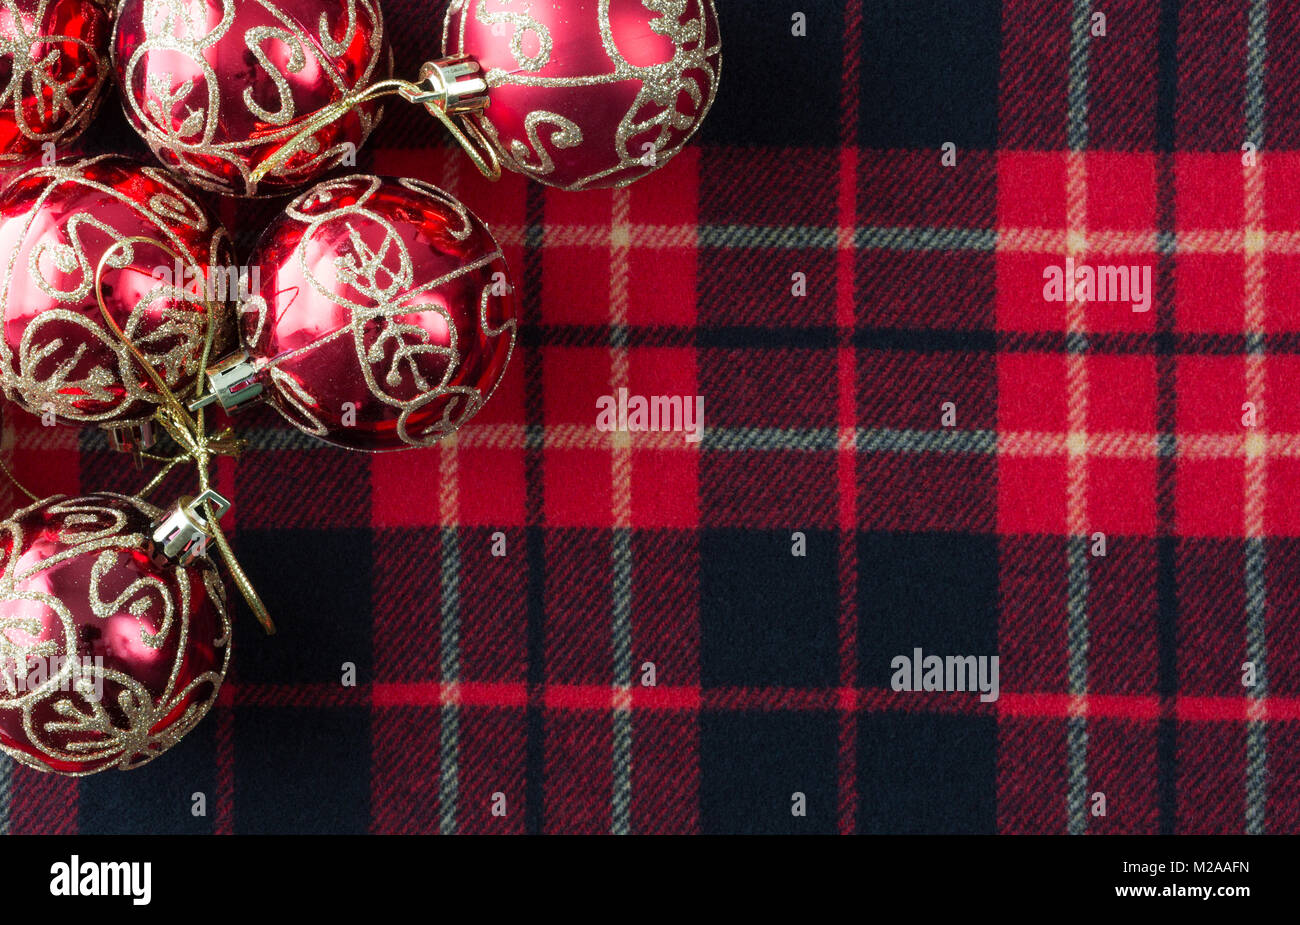 Top view of several Christmas ornaments atop a red, black and white tartan cloth with room for a message. Stock Photo